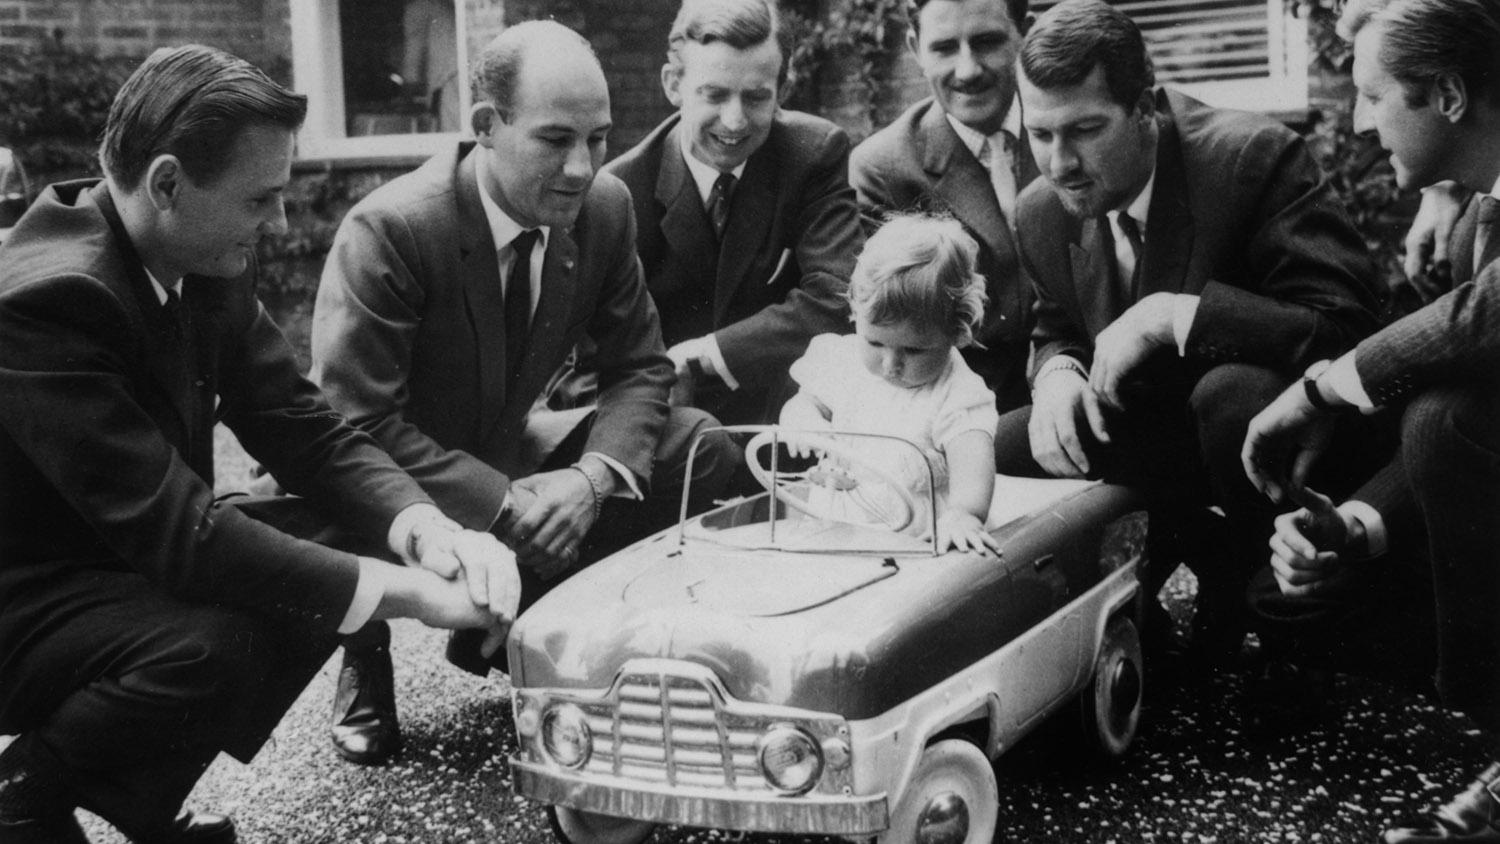  Stirling Moss (2nd from left) watches Damon Hill climb into a toy car in 1961. Happy birthday Stirling & Damon!! 